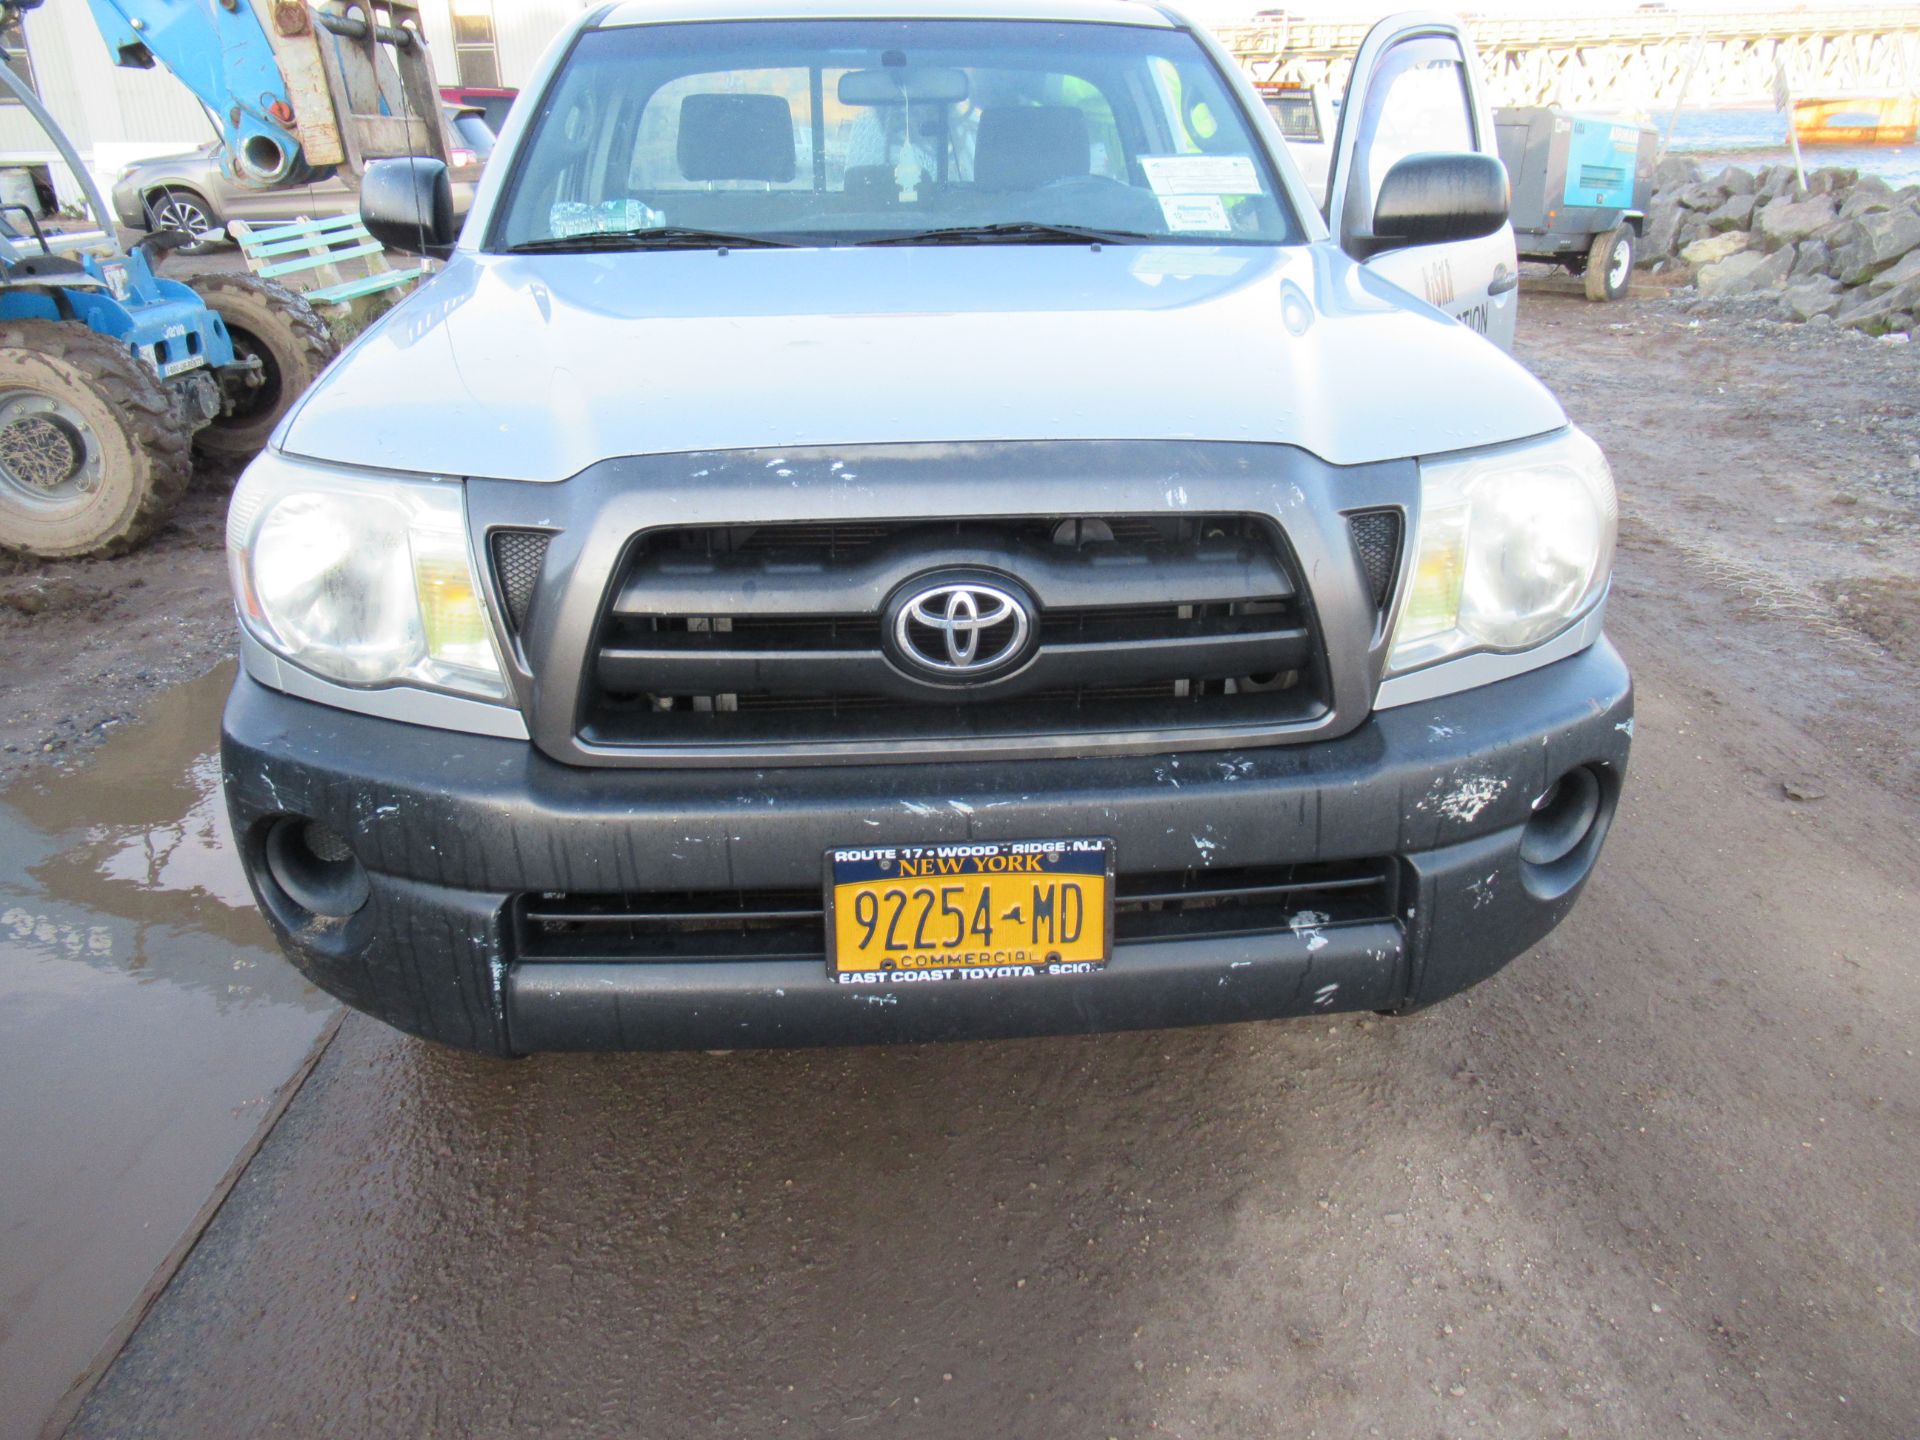 2008 TOYOTA TACOMA PICKUP TRUCK, AUTOMATIC, WITH APPROXIMATELY 105,732 MILES, VIN: 5TENX22N382504186 - Image 7 of 12